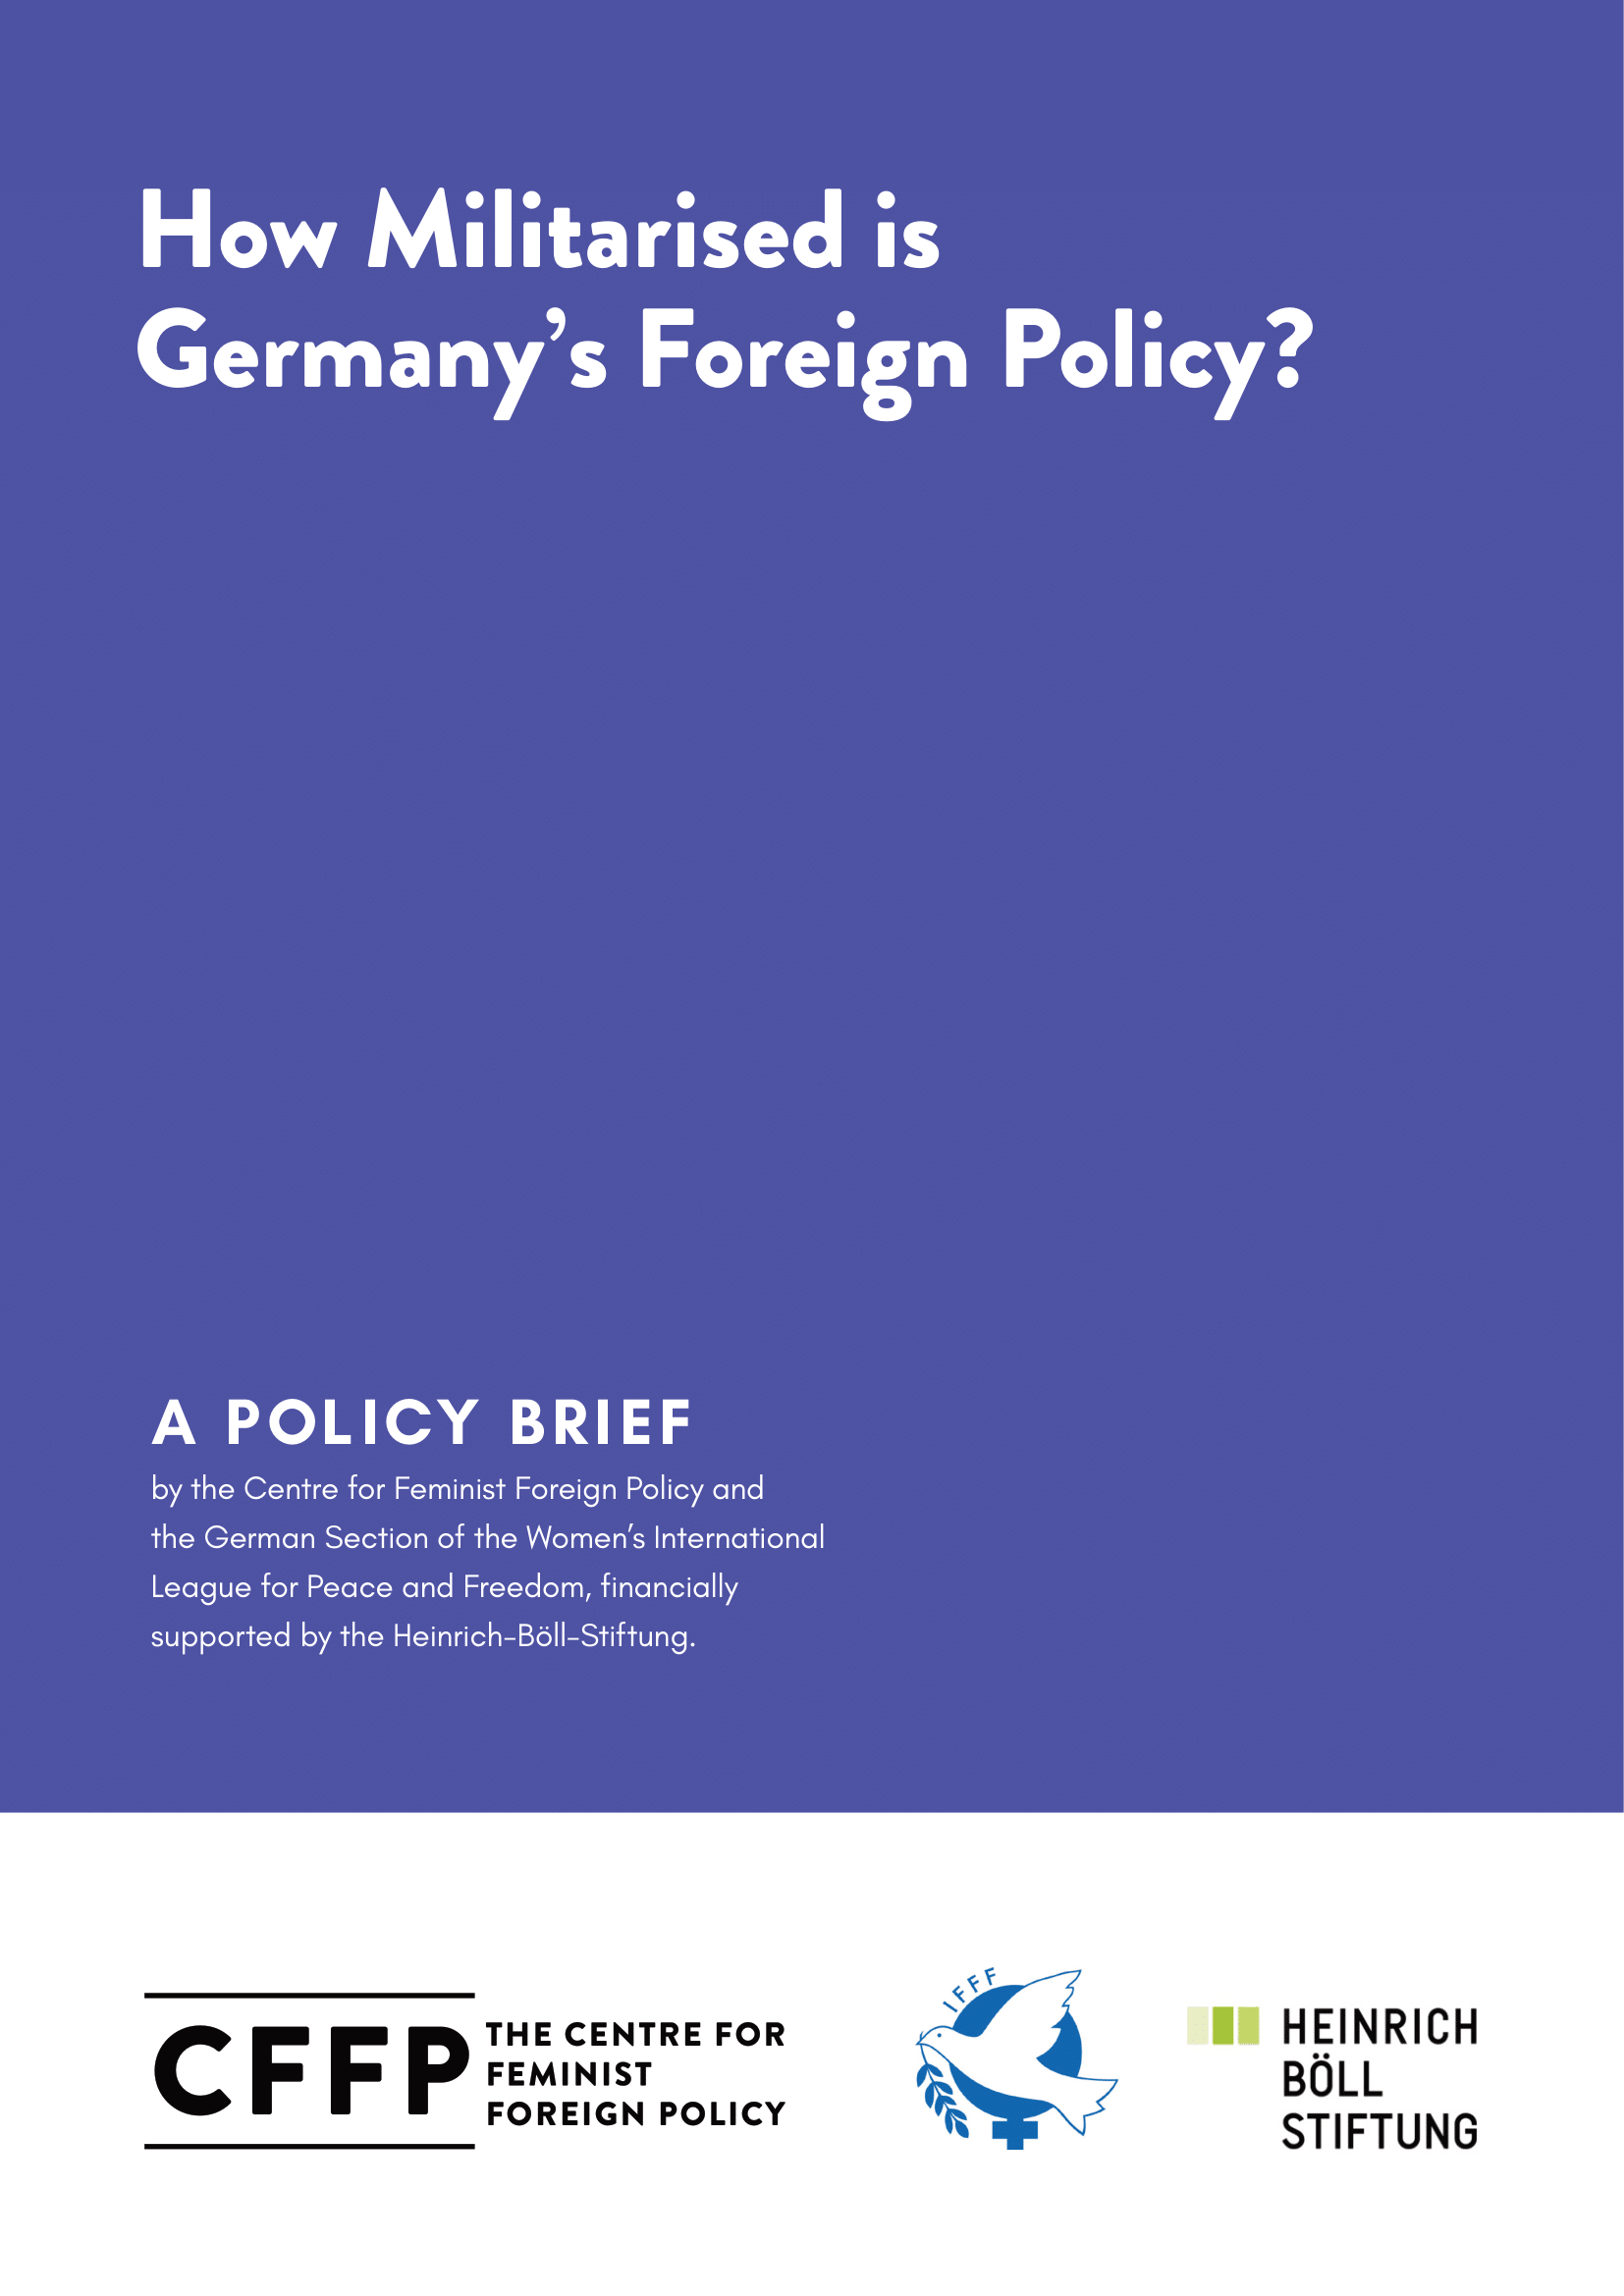 How Militarised is Germany’s Foreign Policy? Report